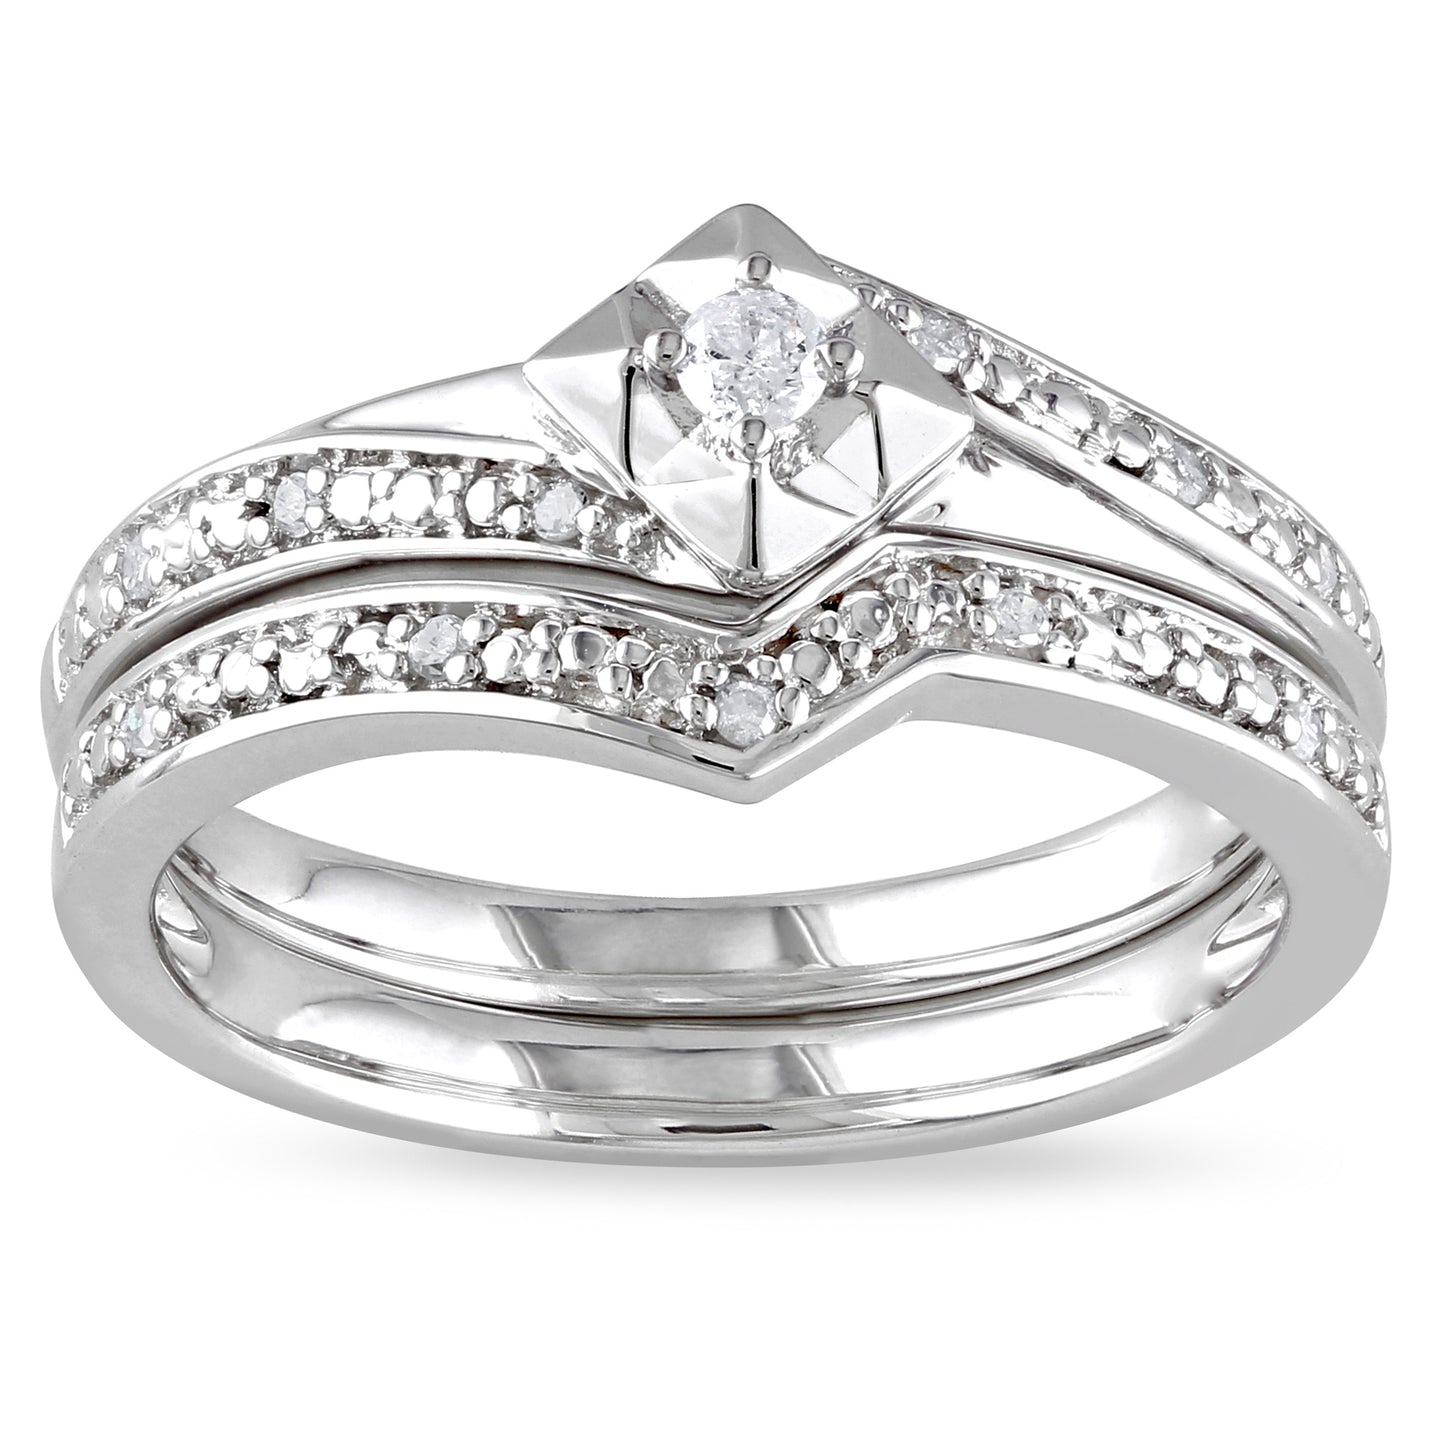 1/10ct Diamond Bridal Set in Sterling Silver